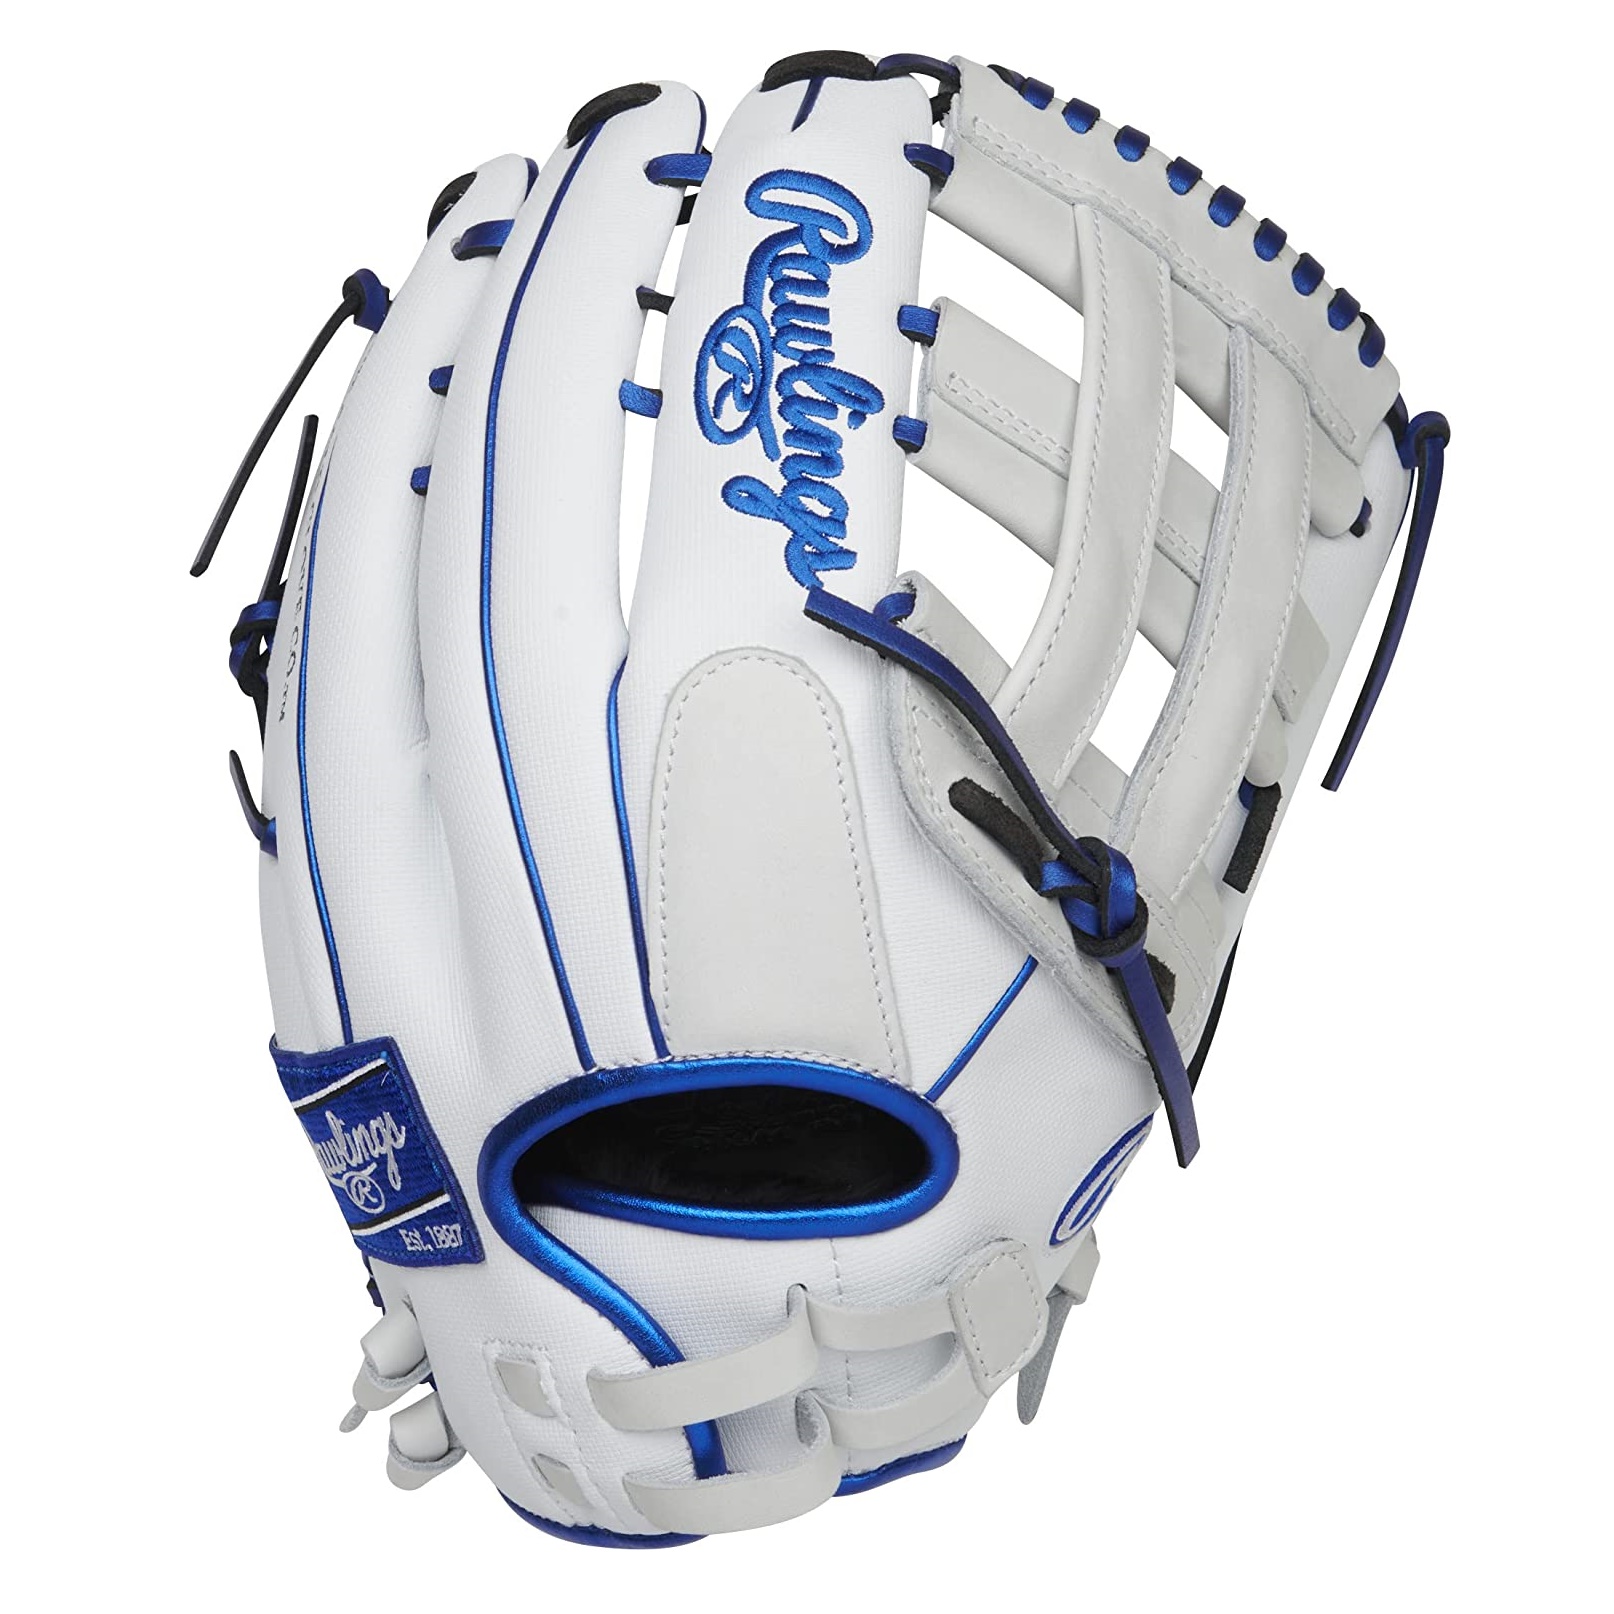 rawlings-liberty-advanced-fastpitch-softball-glove-pro-h-web-13-inch-right-hand-throw RLA130-6WSS-RightHandThrow Rawlings  Rawlings Liberty Advanced fielding gloves continue the tradition as finest in